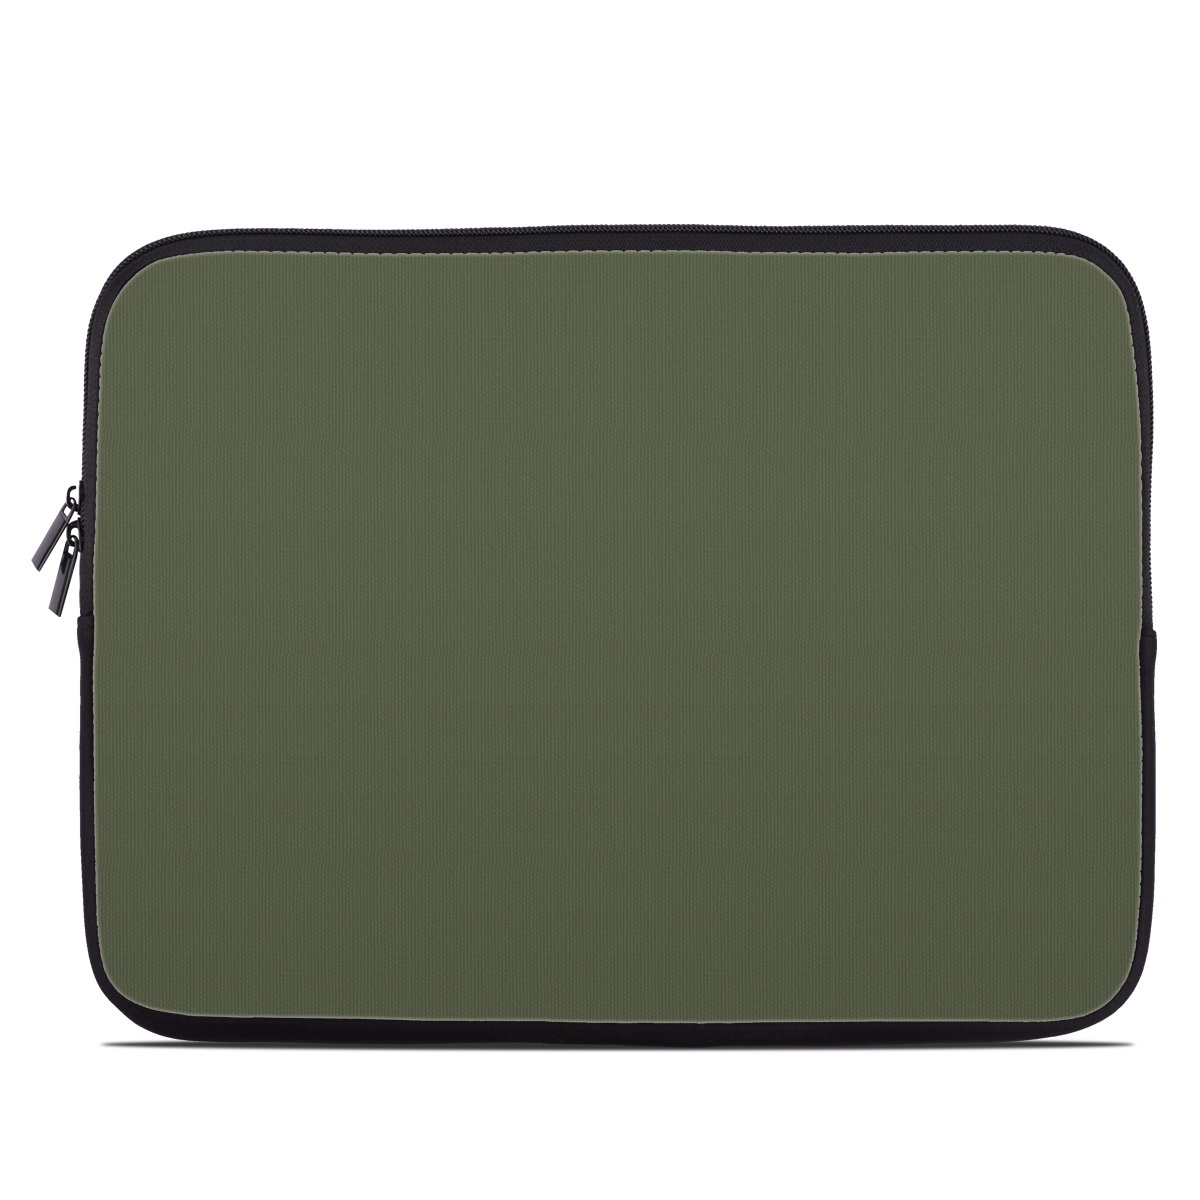 Laptop Sleeve - Solid State Olive Drab (Image 1)